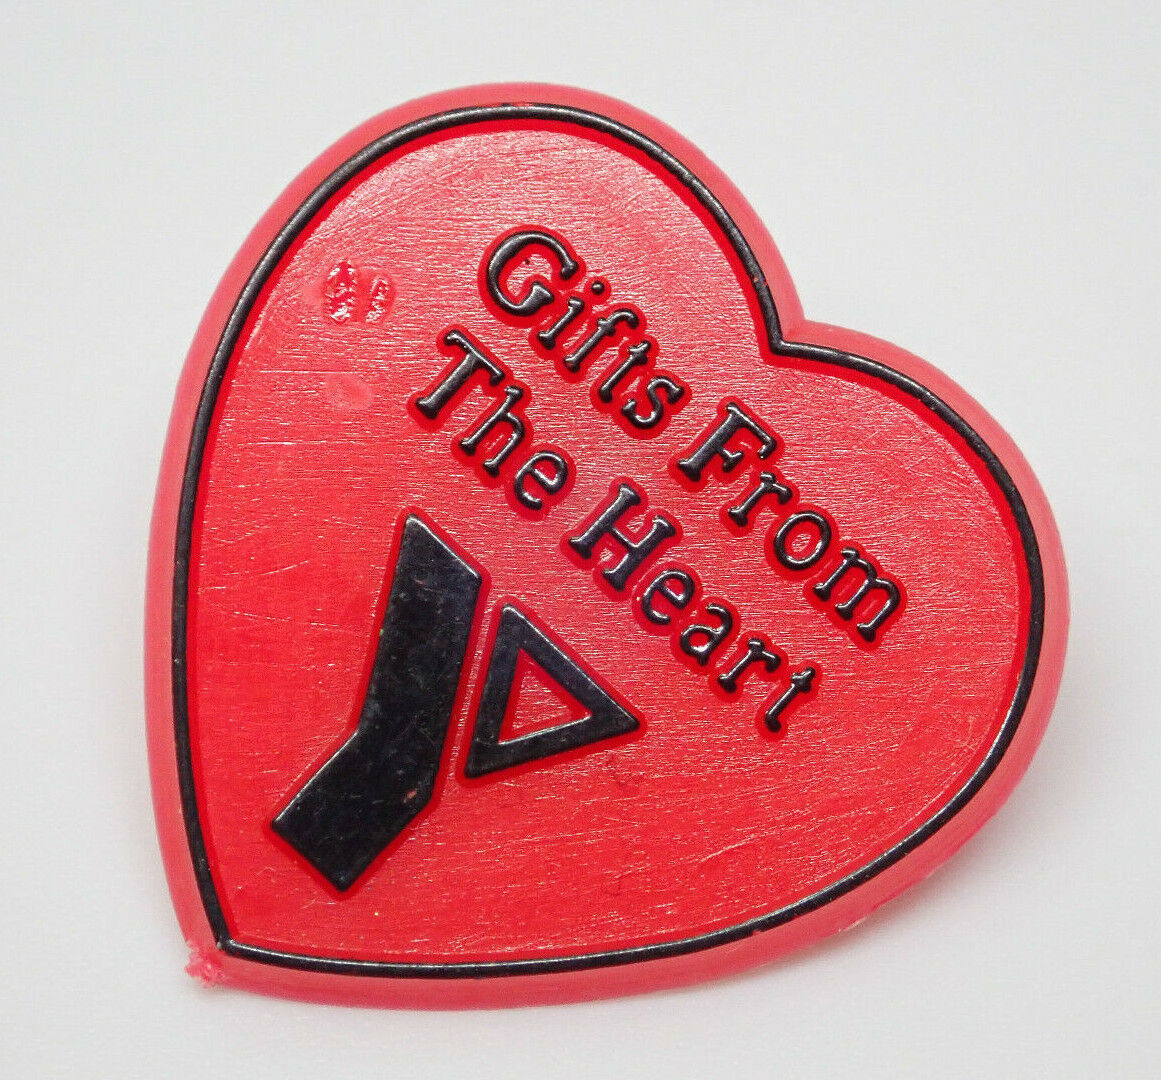 YMCA Gifts From The Heart Vintage Lapel Pin